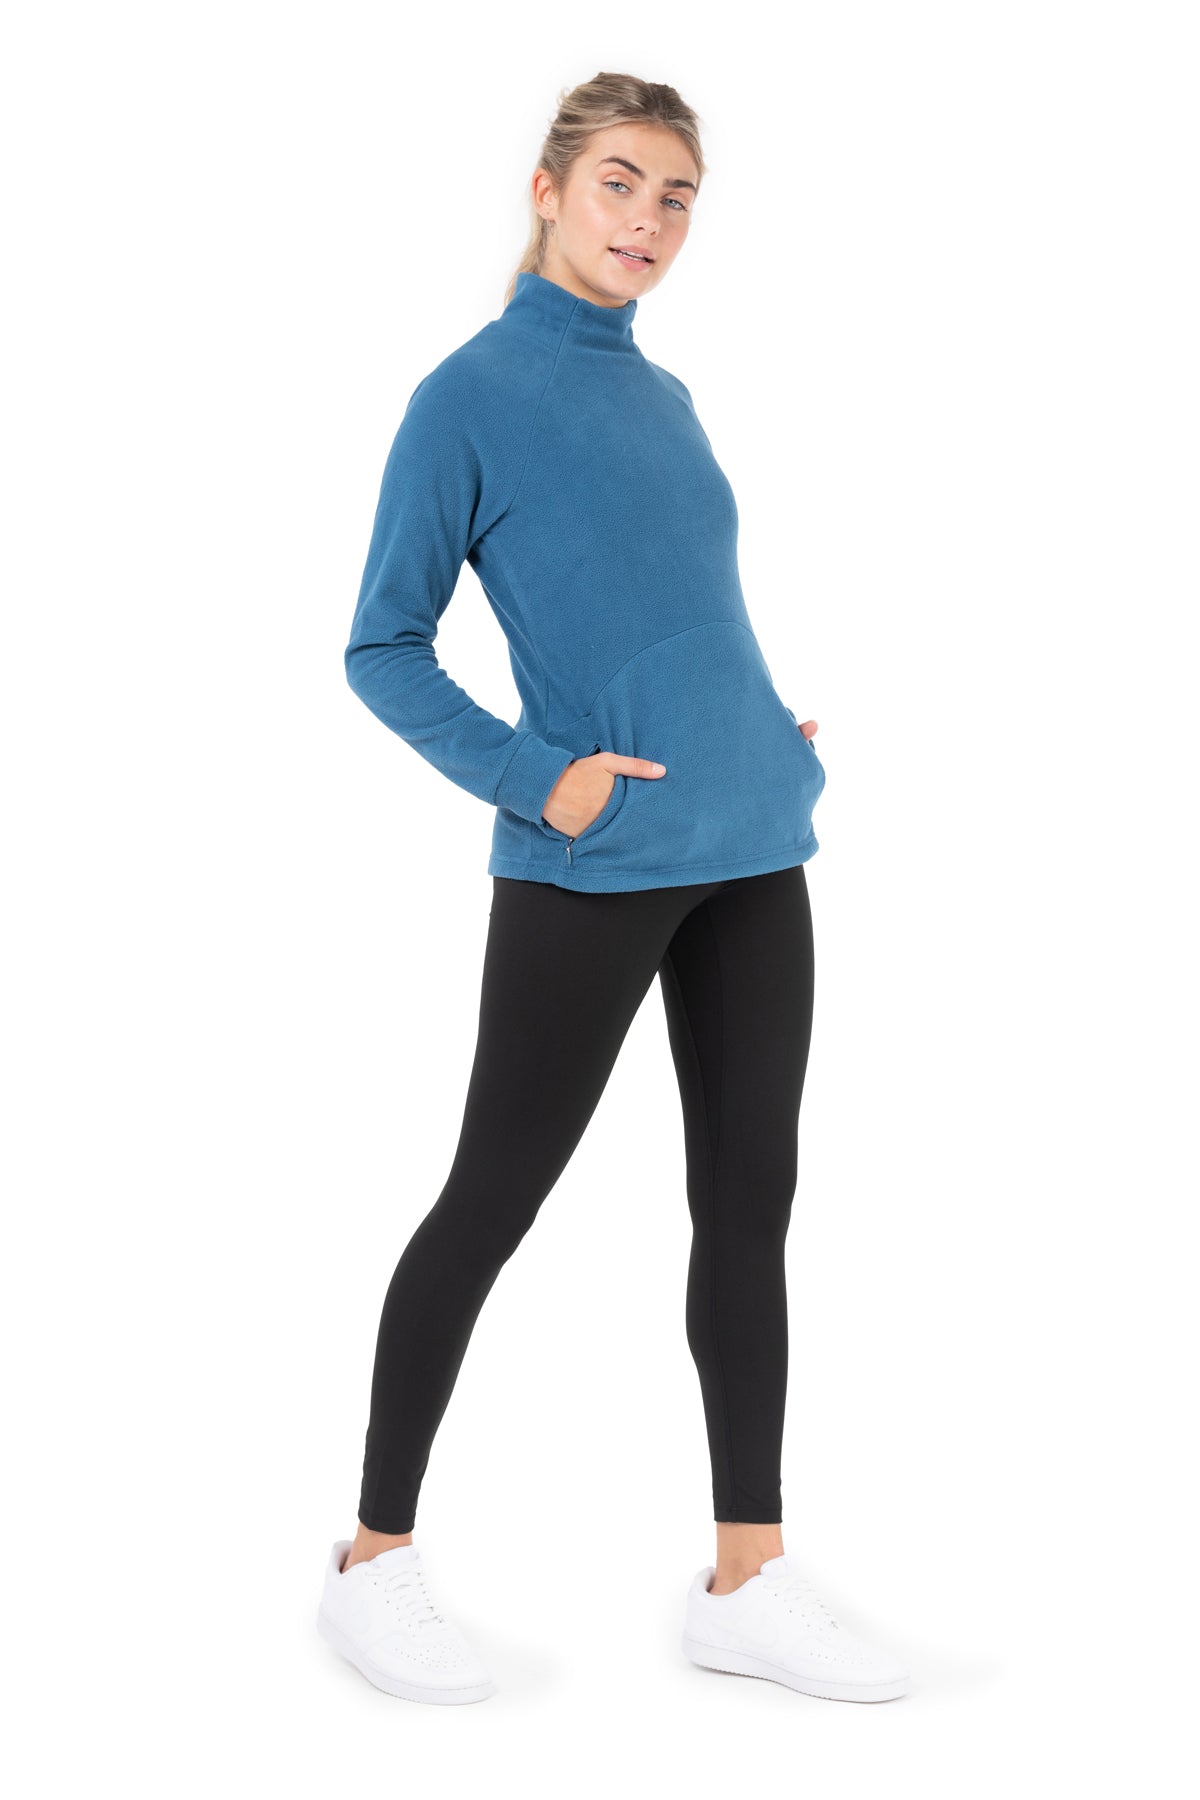 Buy Blue Solid Knitted Leggings for INR349.50